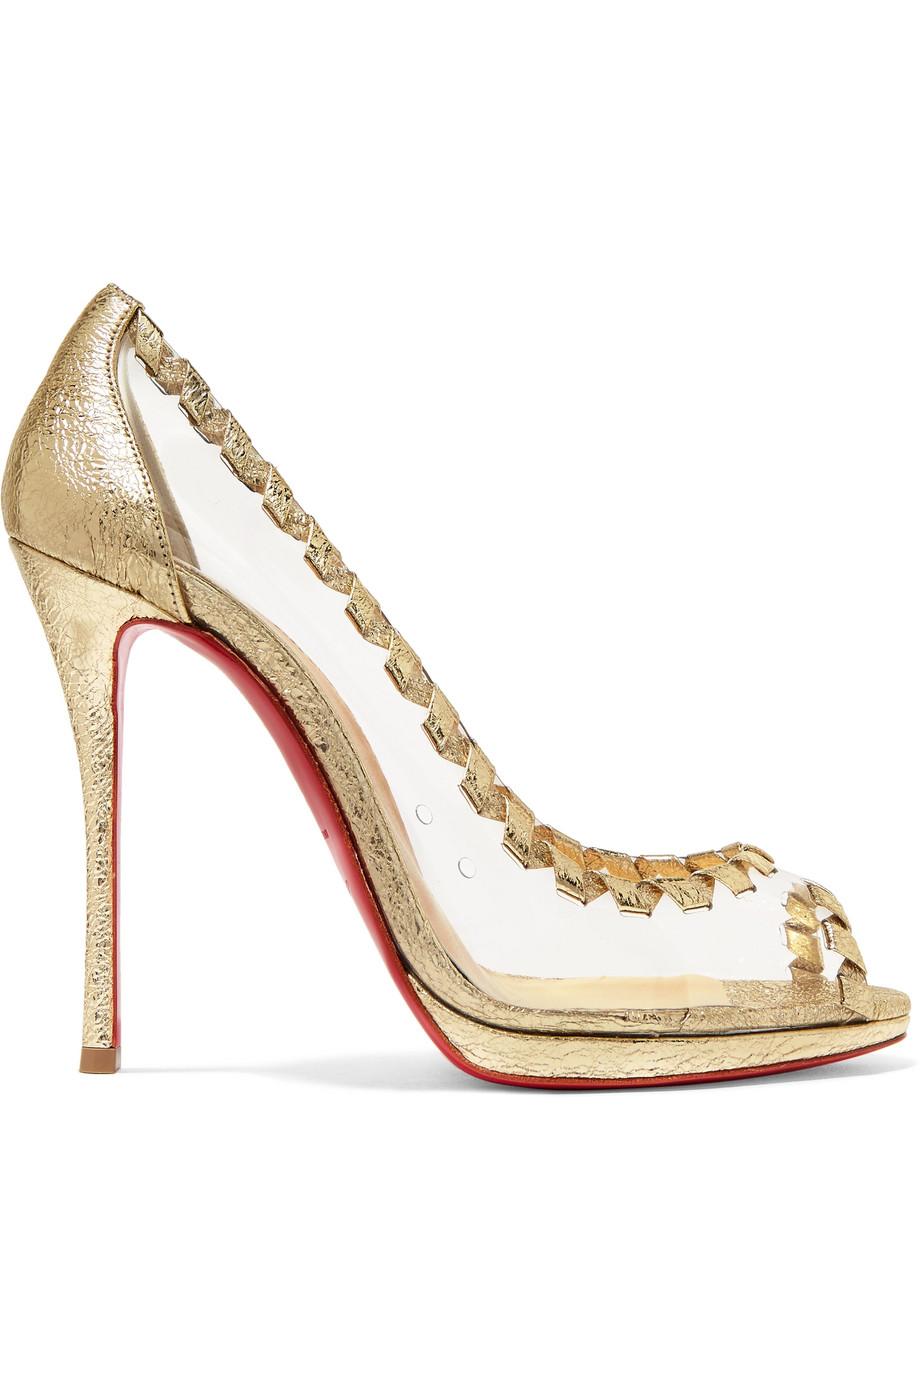 Beige Christian Louboutin NEW Gold Leather Clear PVC Sandals Pumps Heels in Box